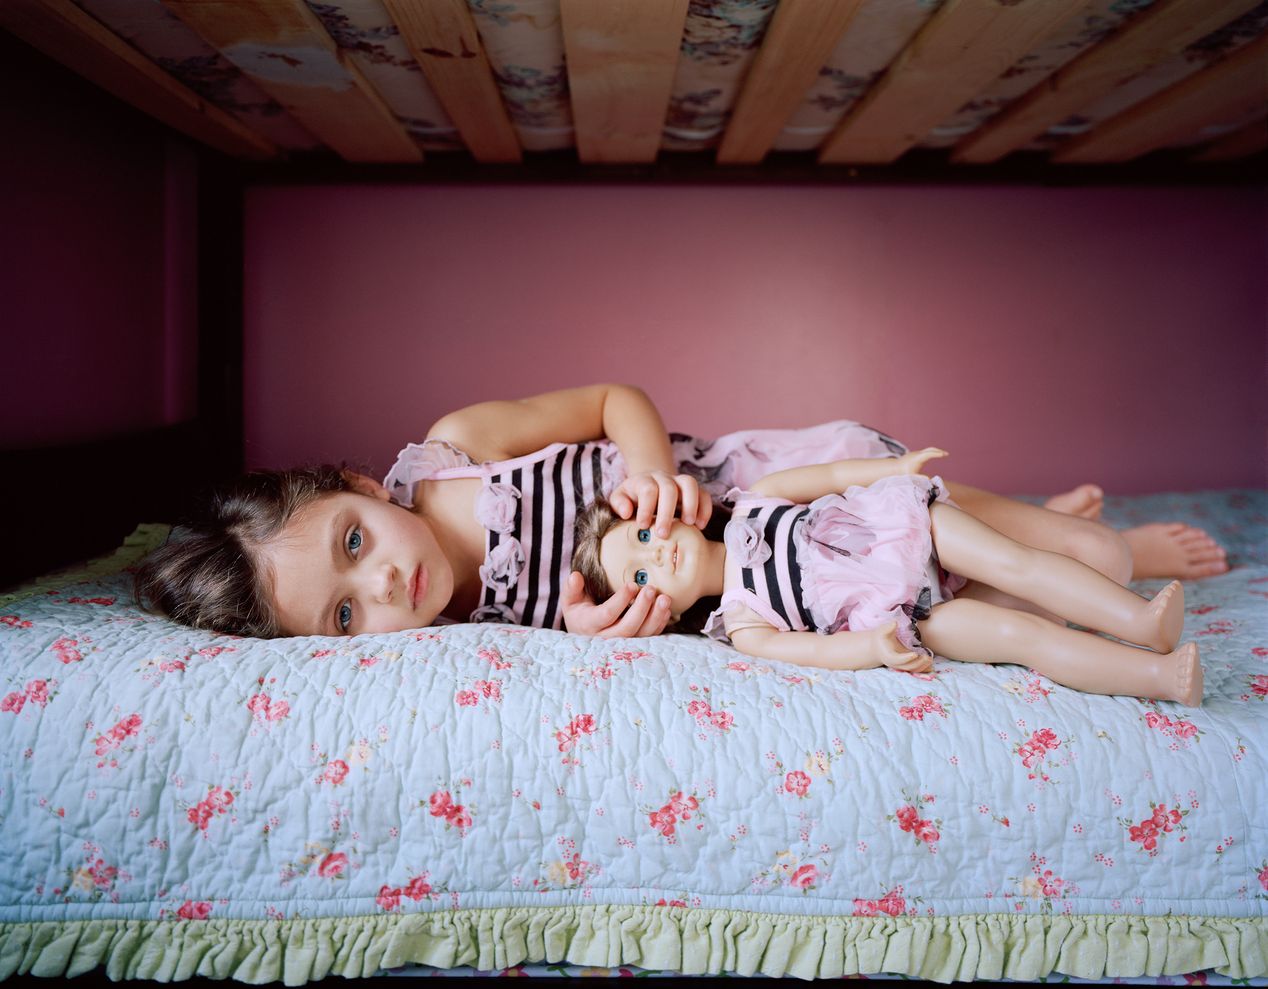 A young girl holding her doll's eyes open, environmental portrait photography, Ilona Szwarc, contemporary Los Angeles artist.